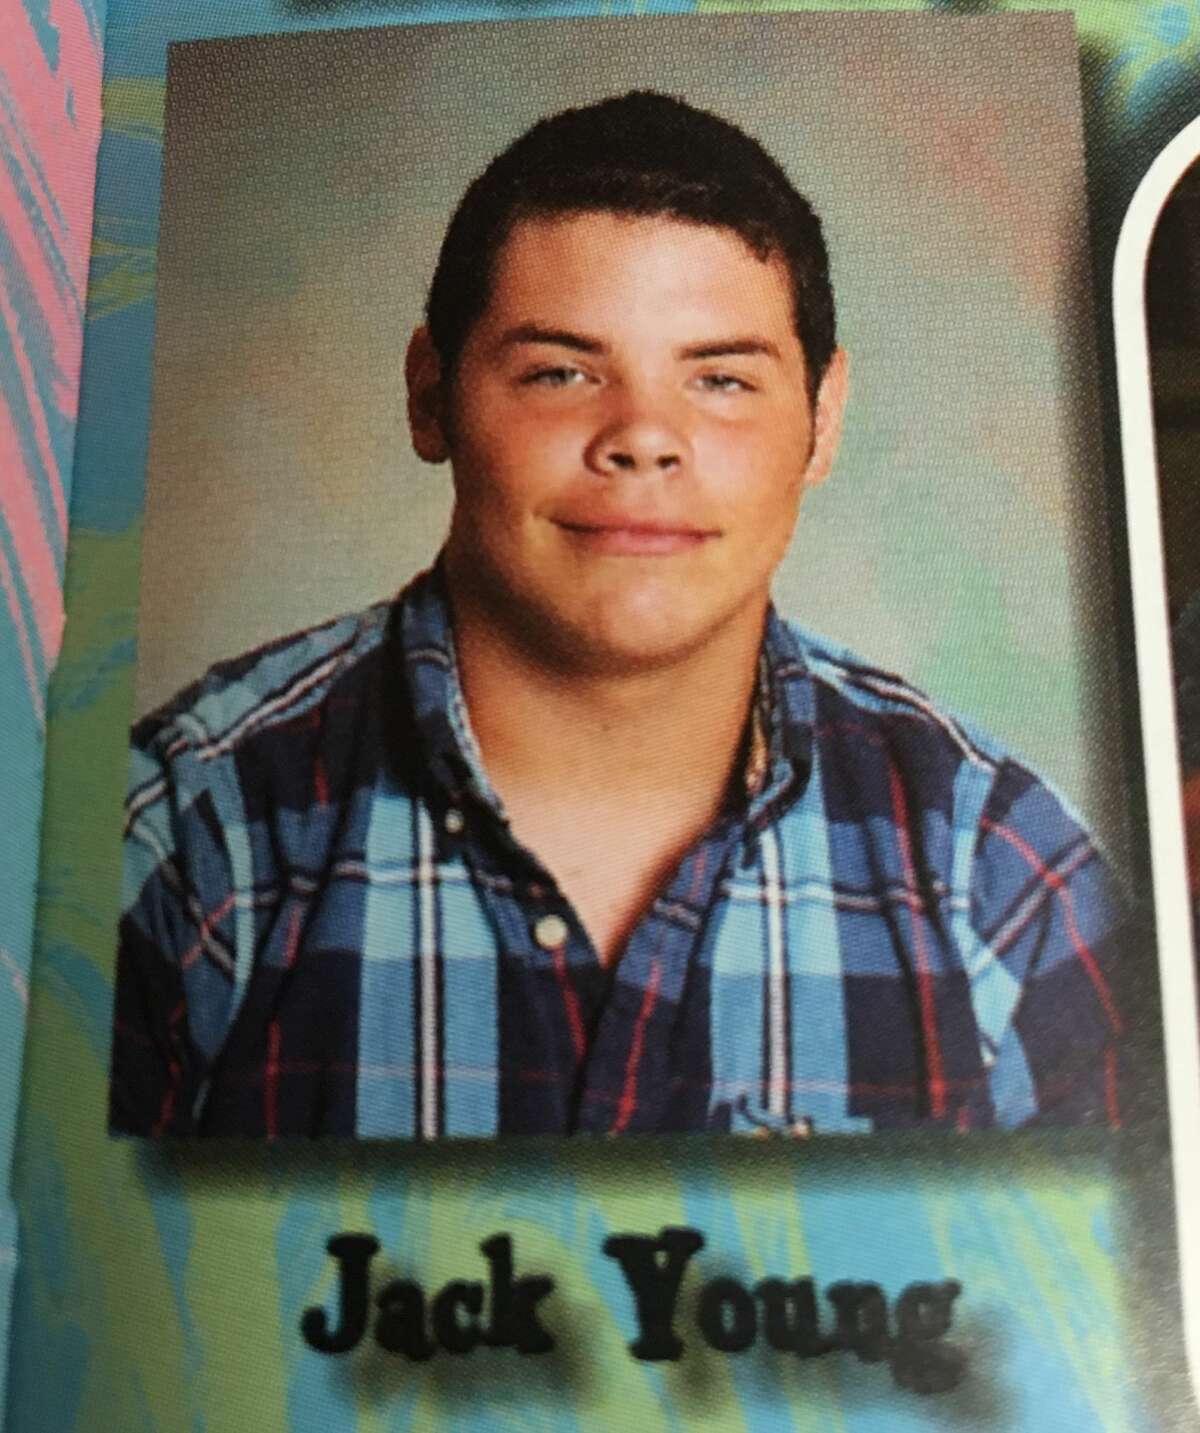 Jack Young pictured in a yearbook photo shared by KABB.